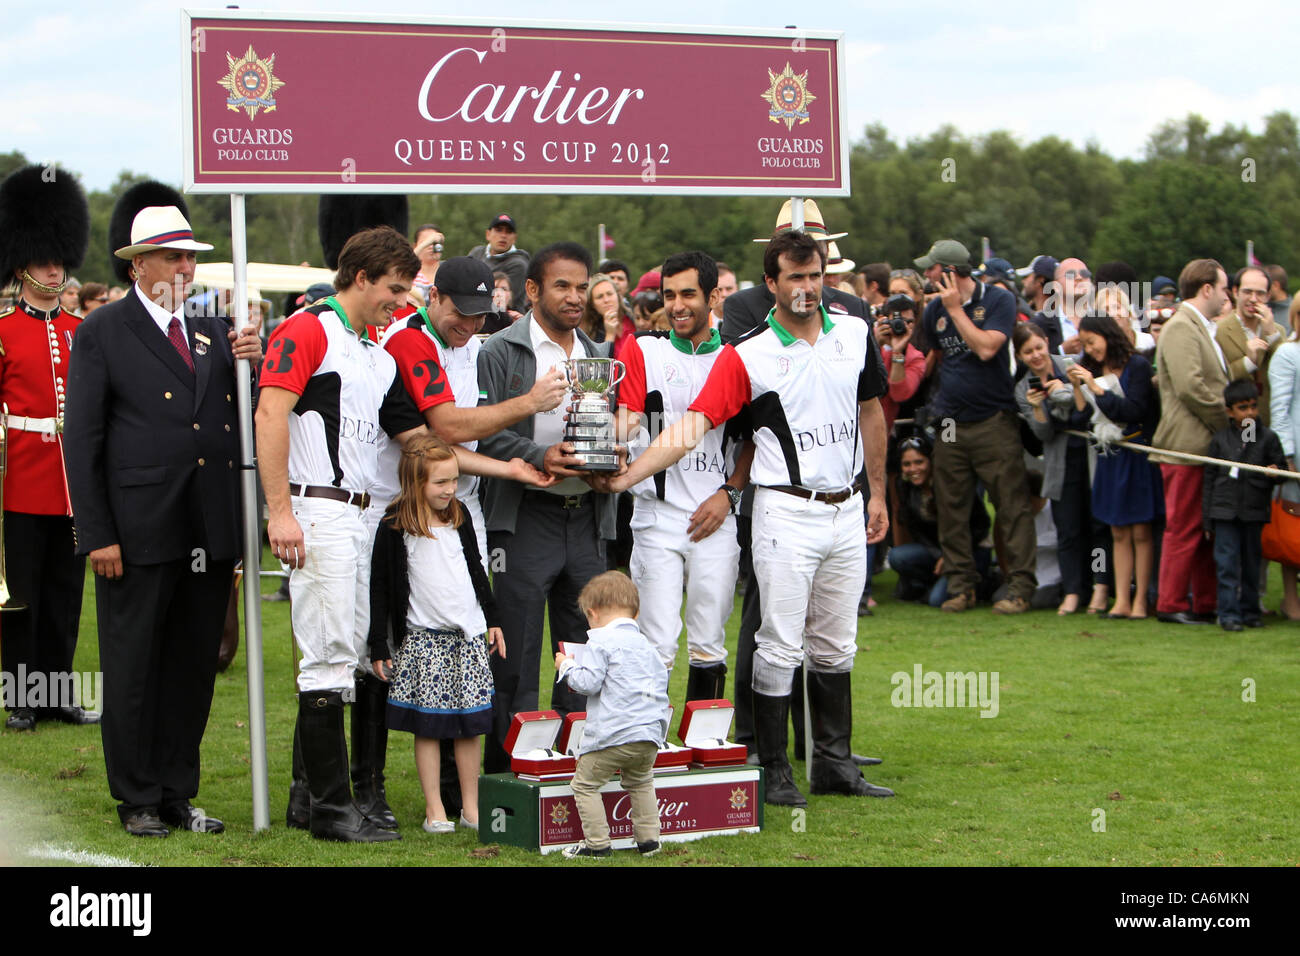 17.06.2012. Guards Polo Club, Windsor, Berkshire, England.  Dubai Team with the Tropy at Guards Polo Club - The Cartier Queen's Cup Final 2012 Stock Photo